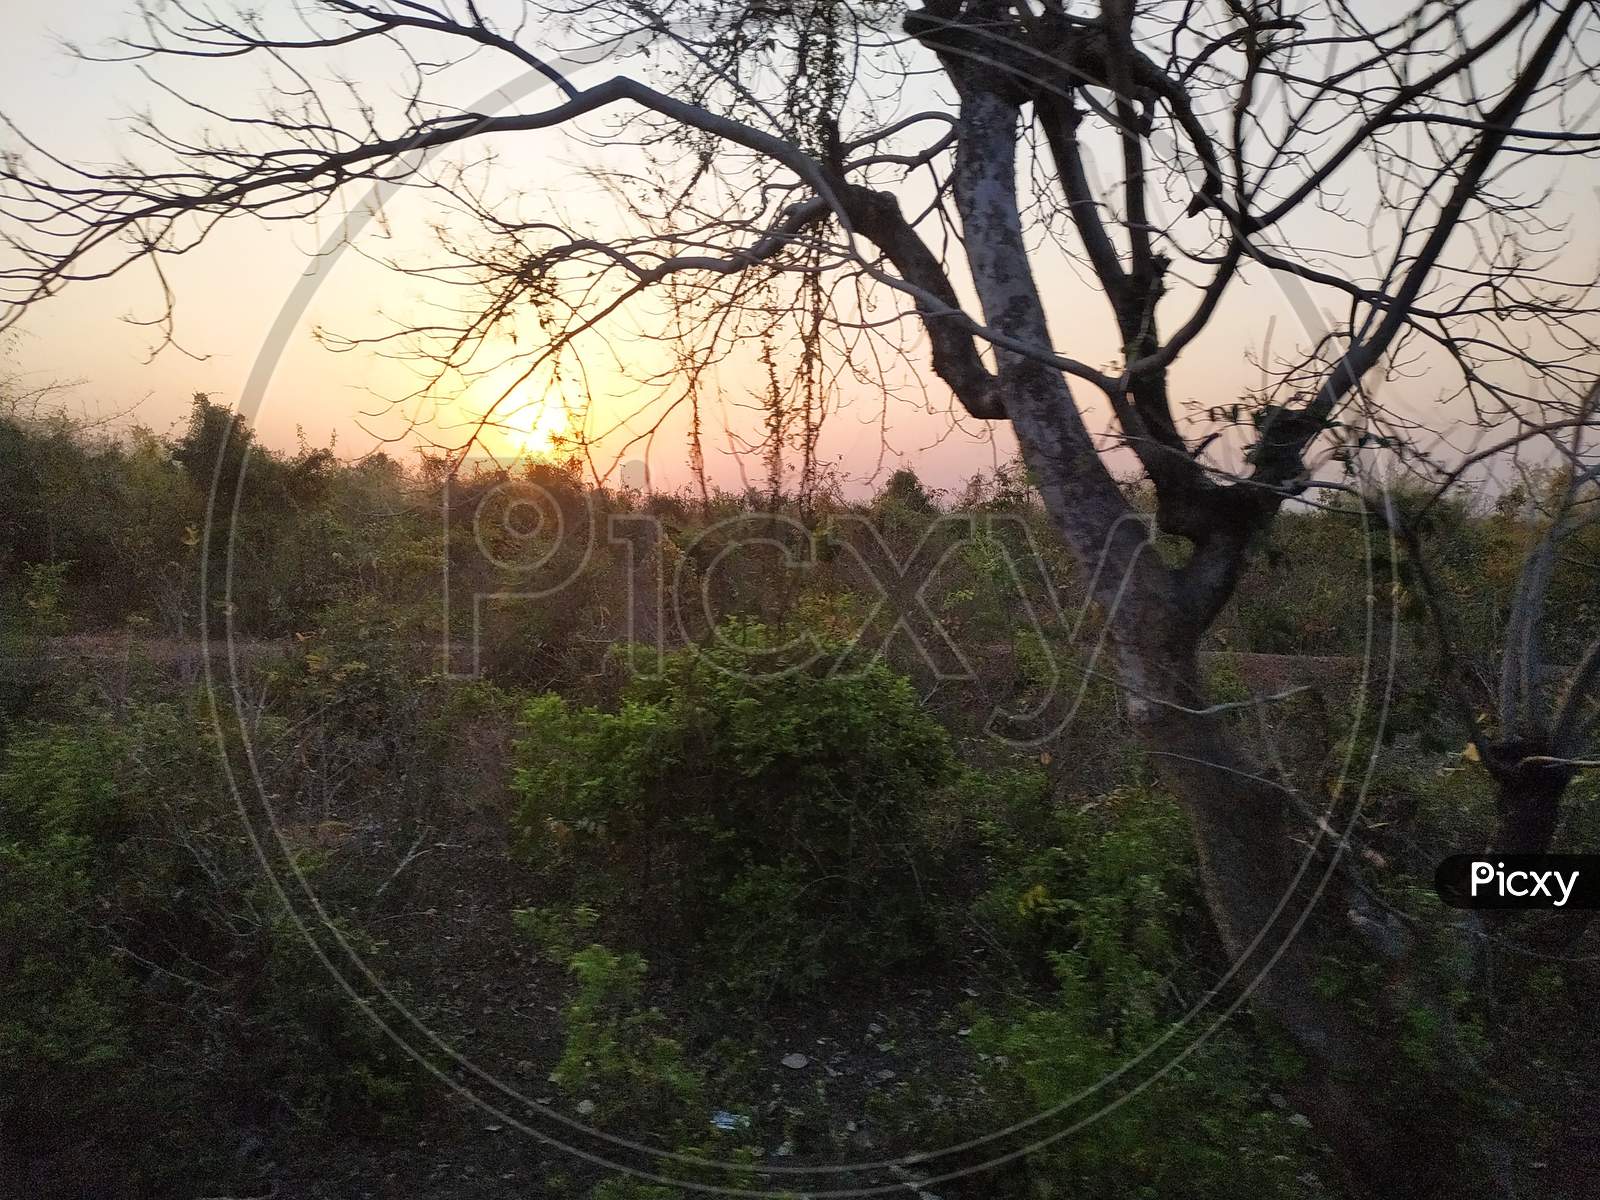 Sunset View From Countryside Area Through Trees In Summer